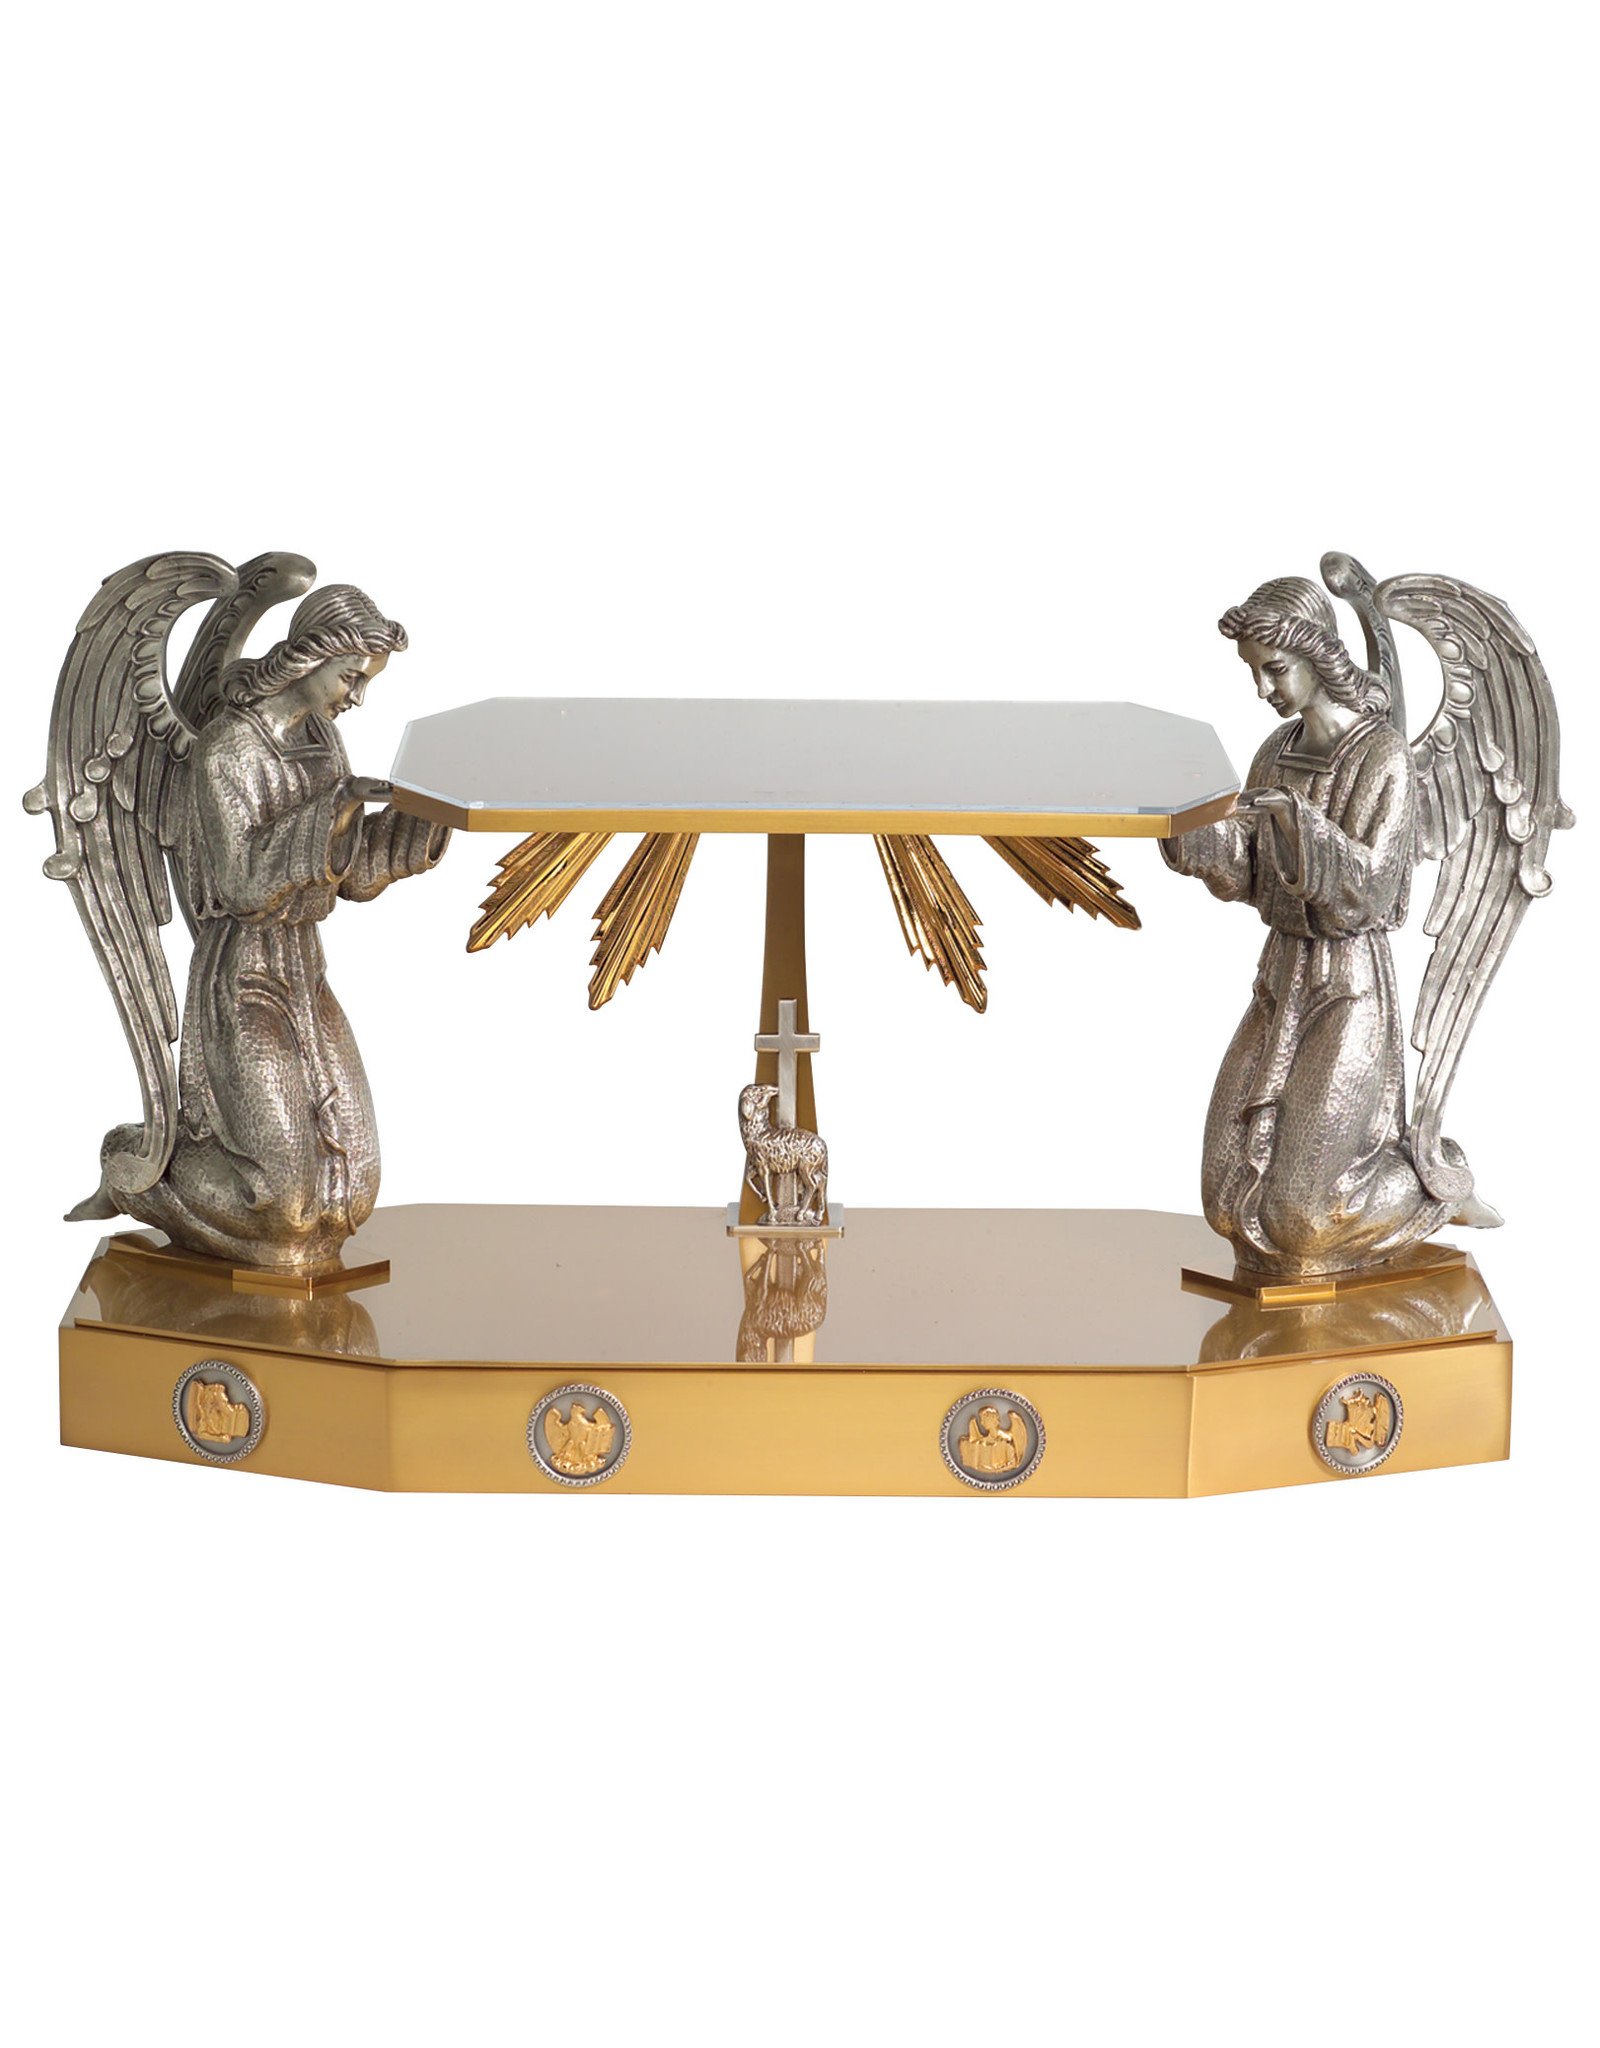 Thabor (Pedestal) with Large Antique Silver Plated Angels